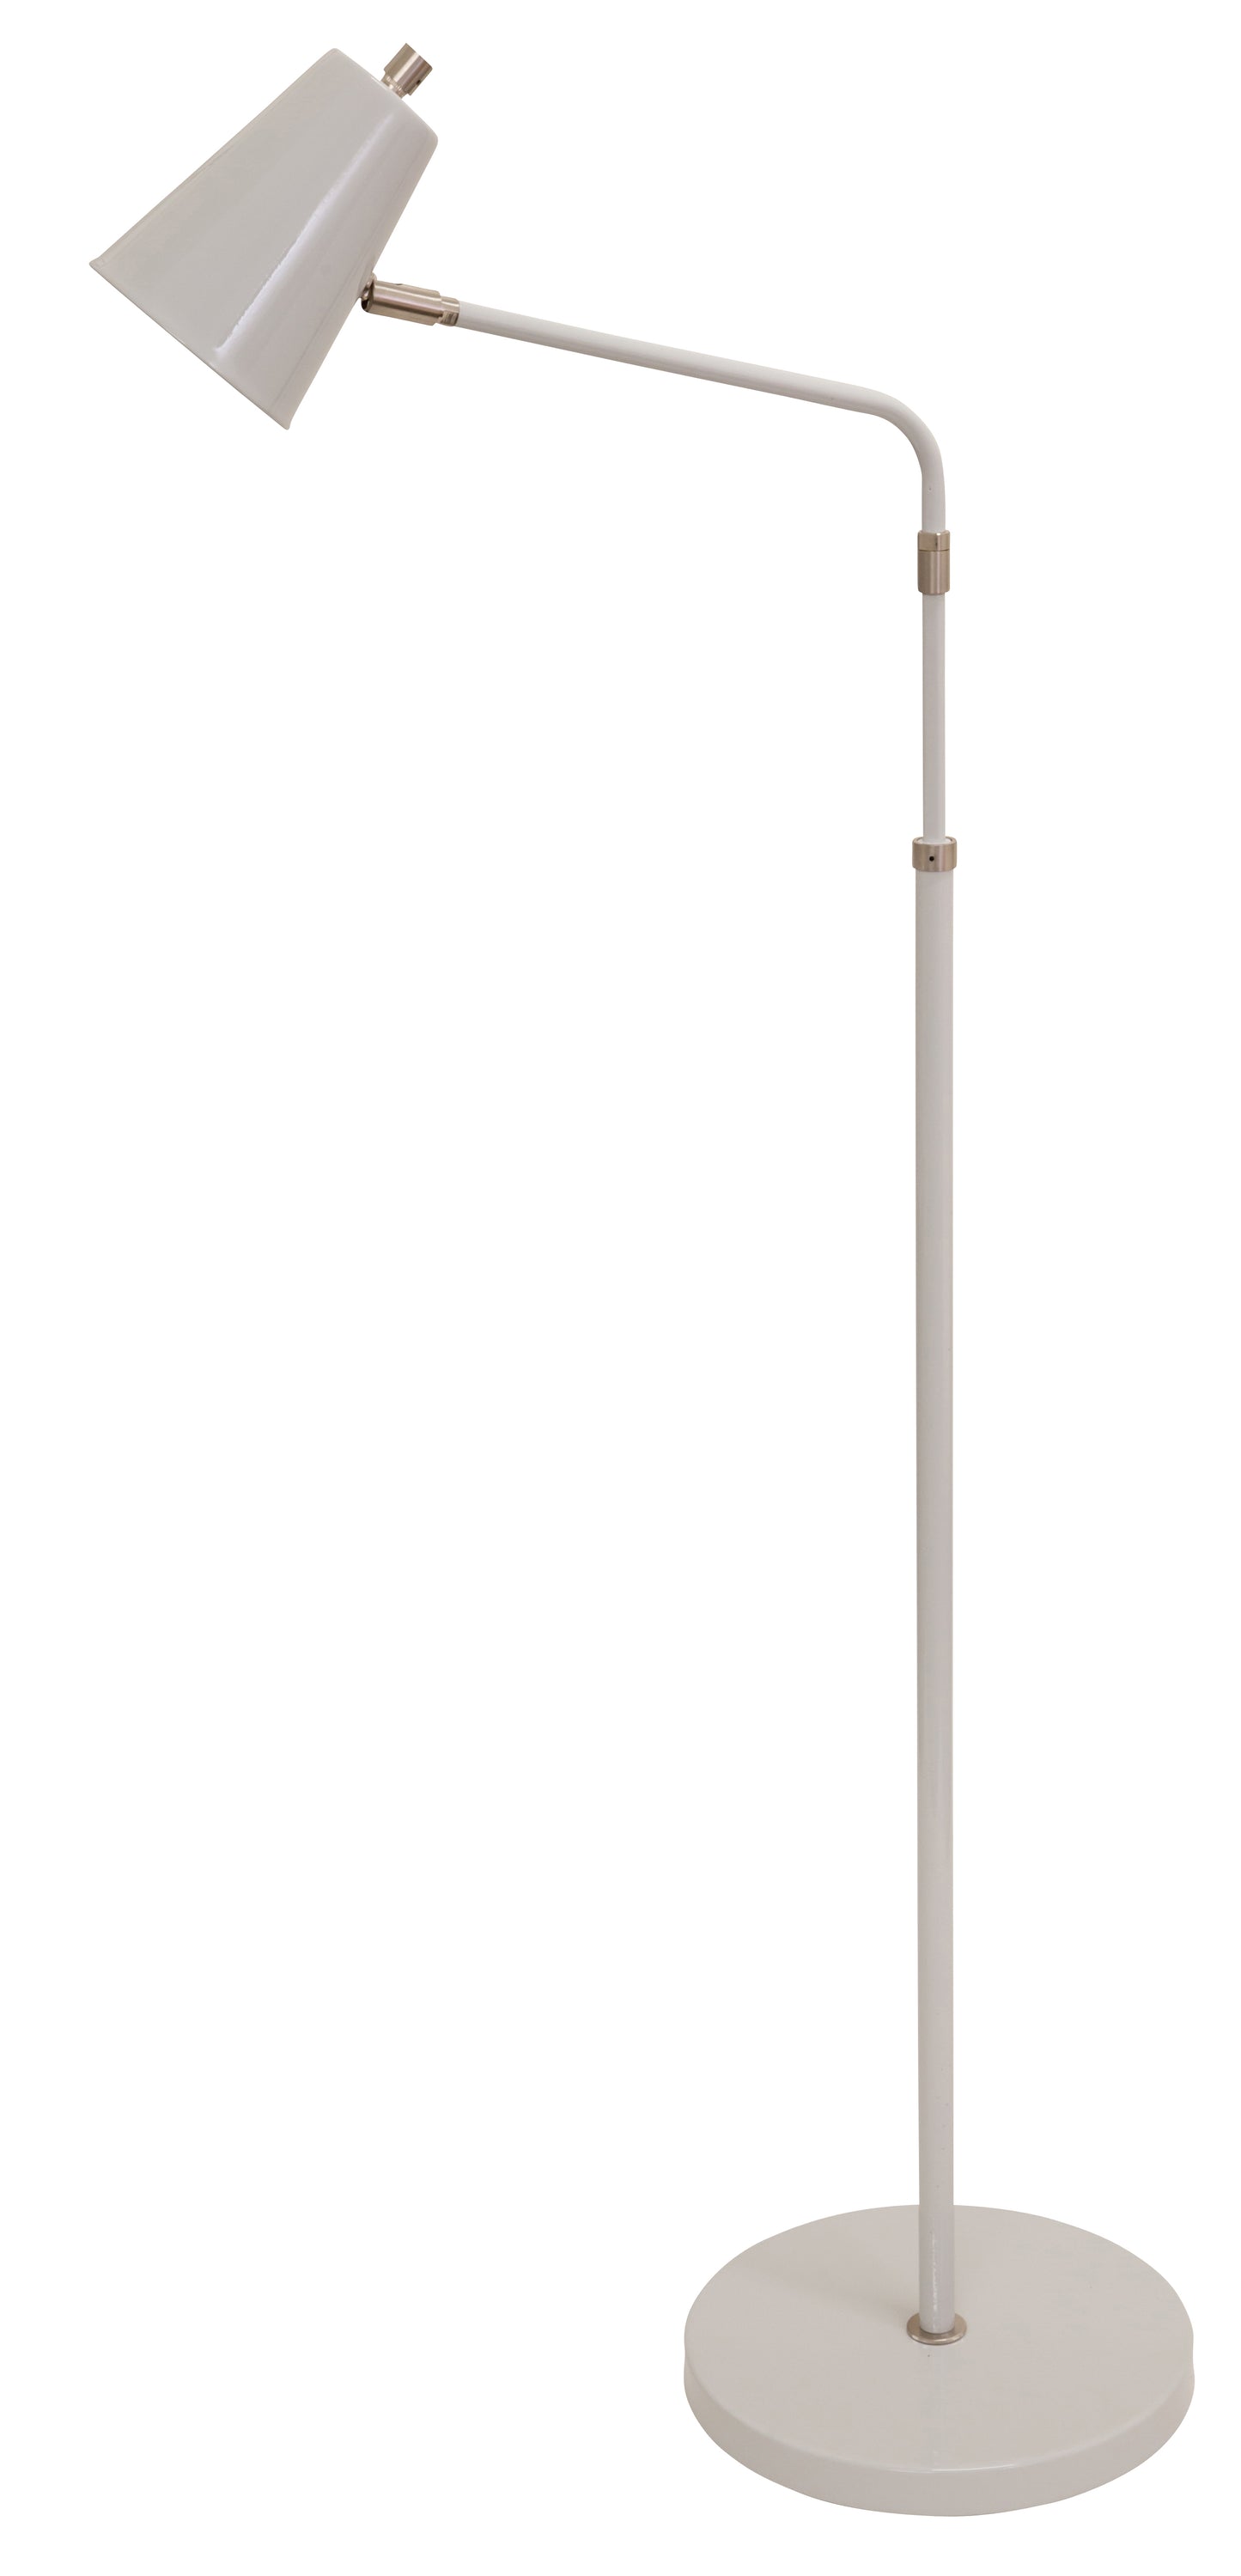 House of Troy Kirby LED adjustable floor lamp in gray with satin nickel accents K100-GR